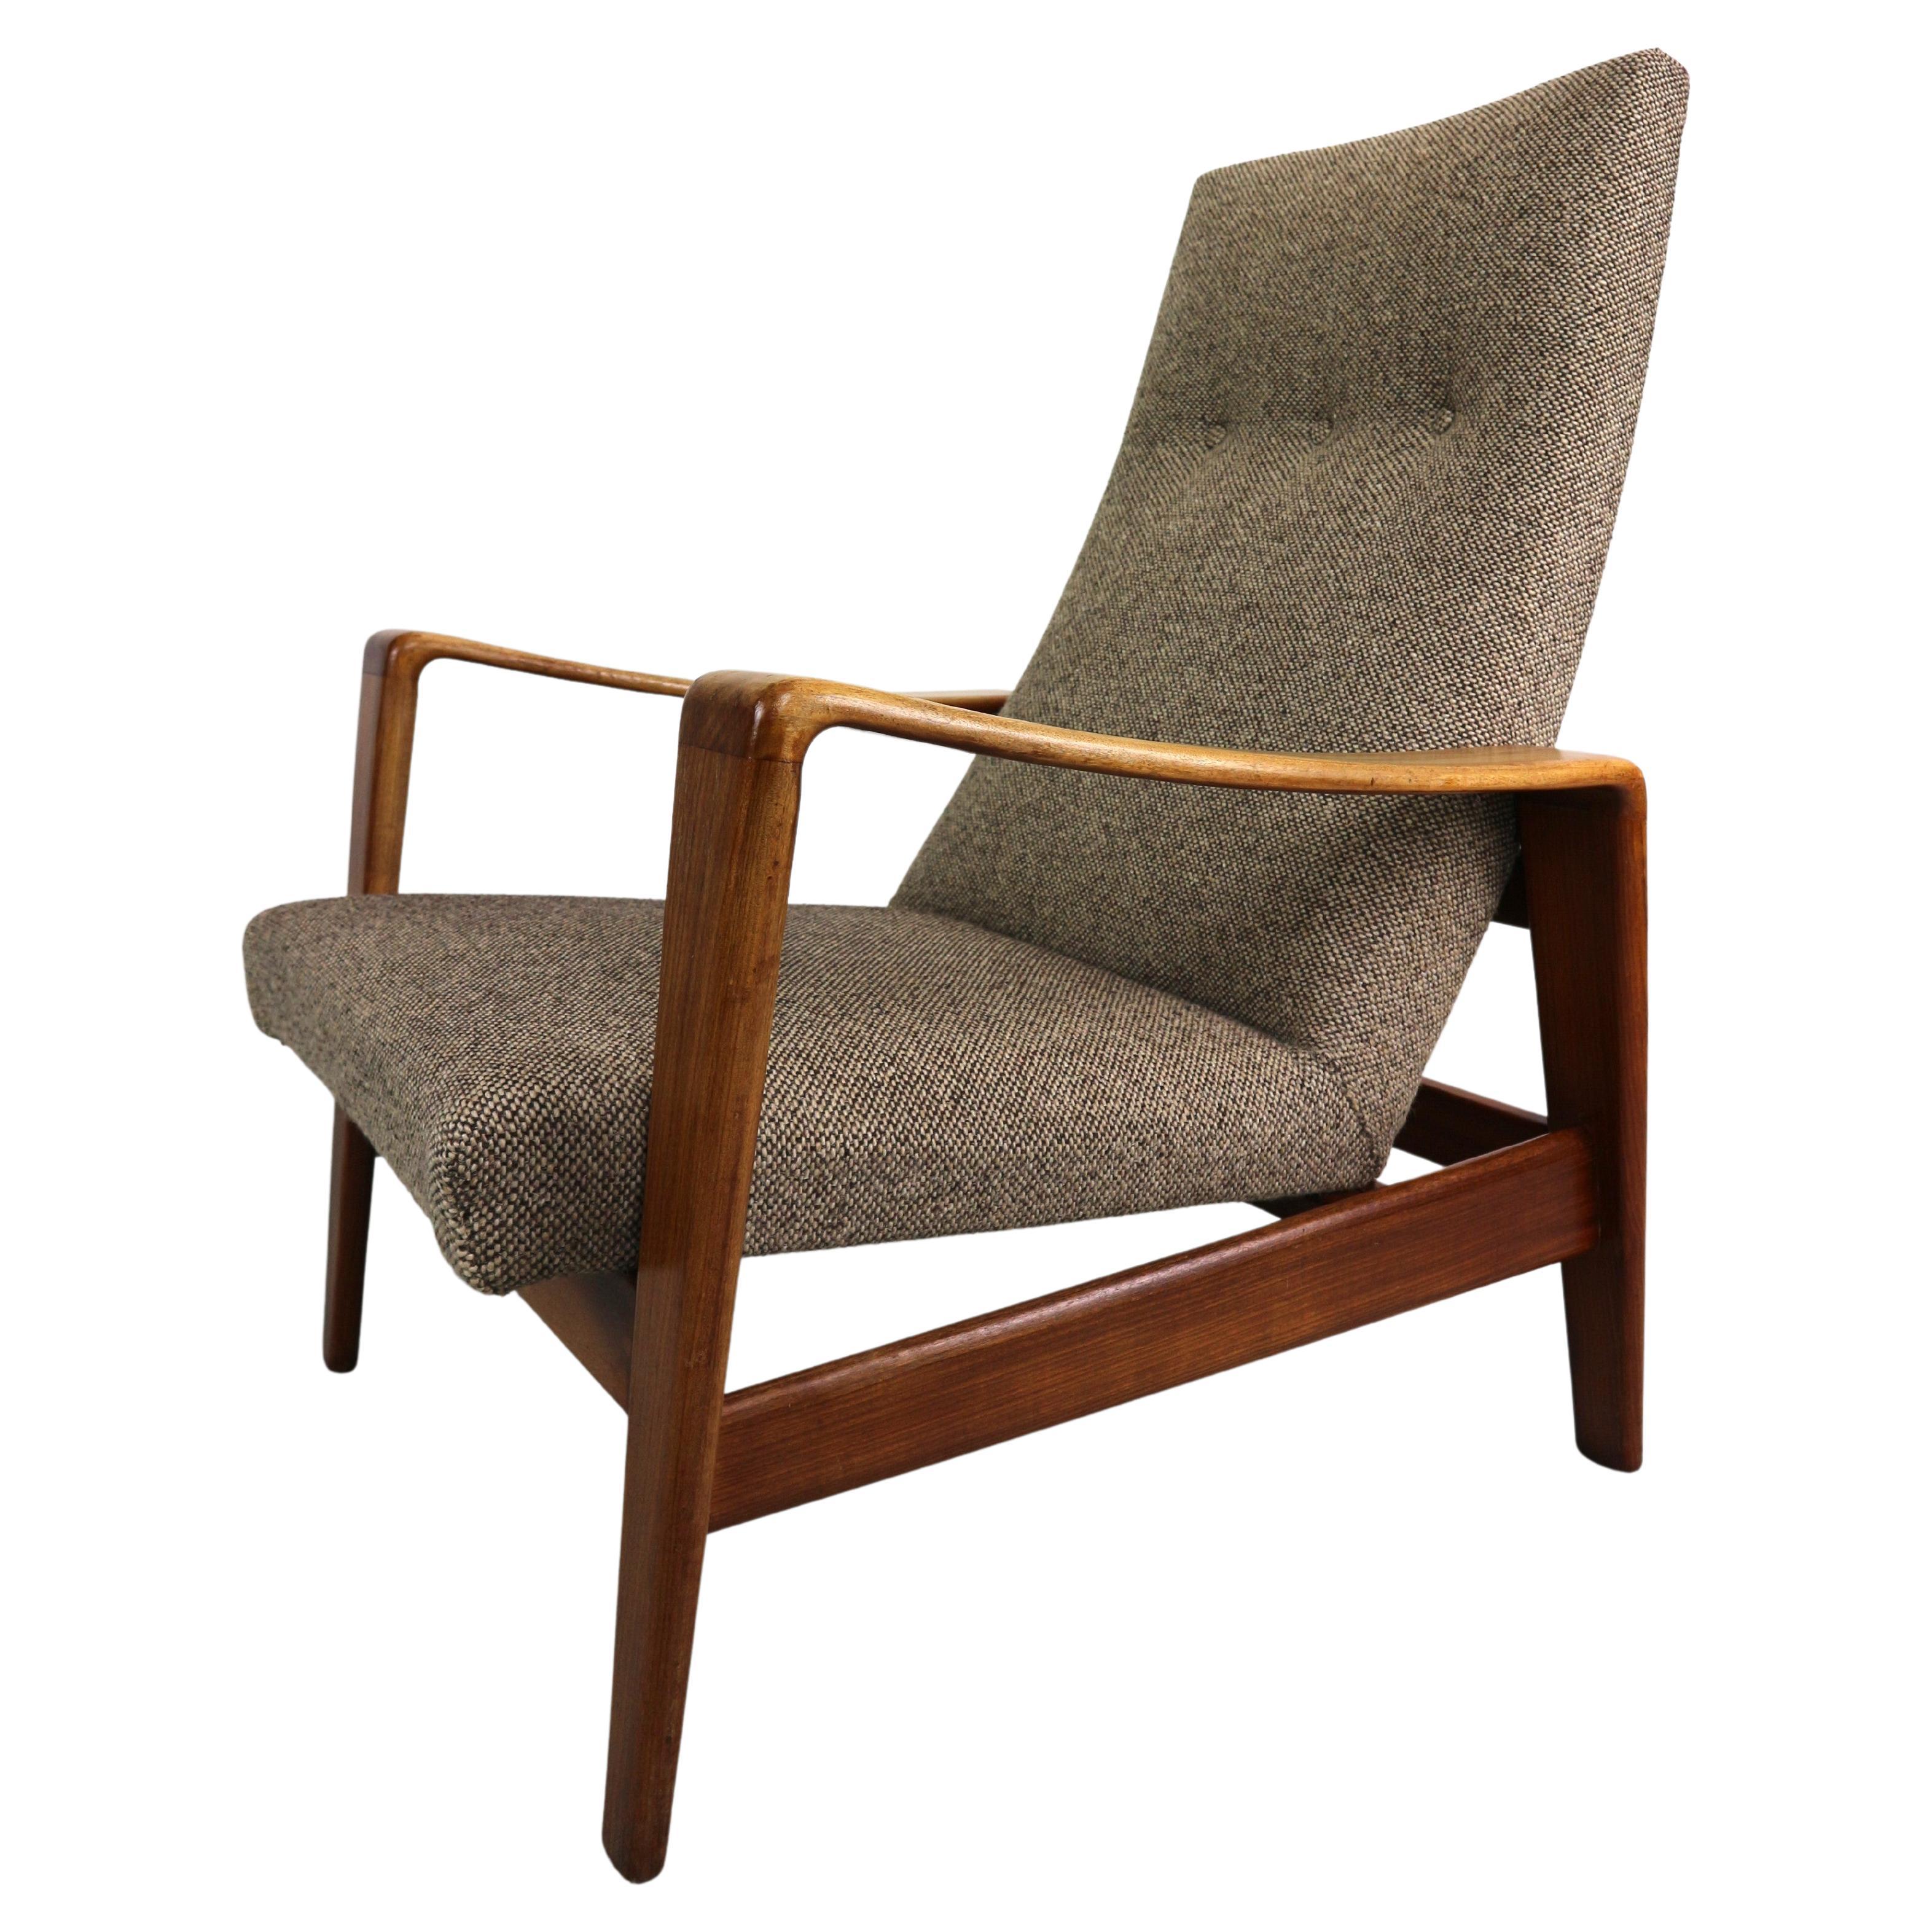 Lounge Chair by Arne Wahl Iversen for Komfort, 1960s For Sale